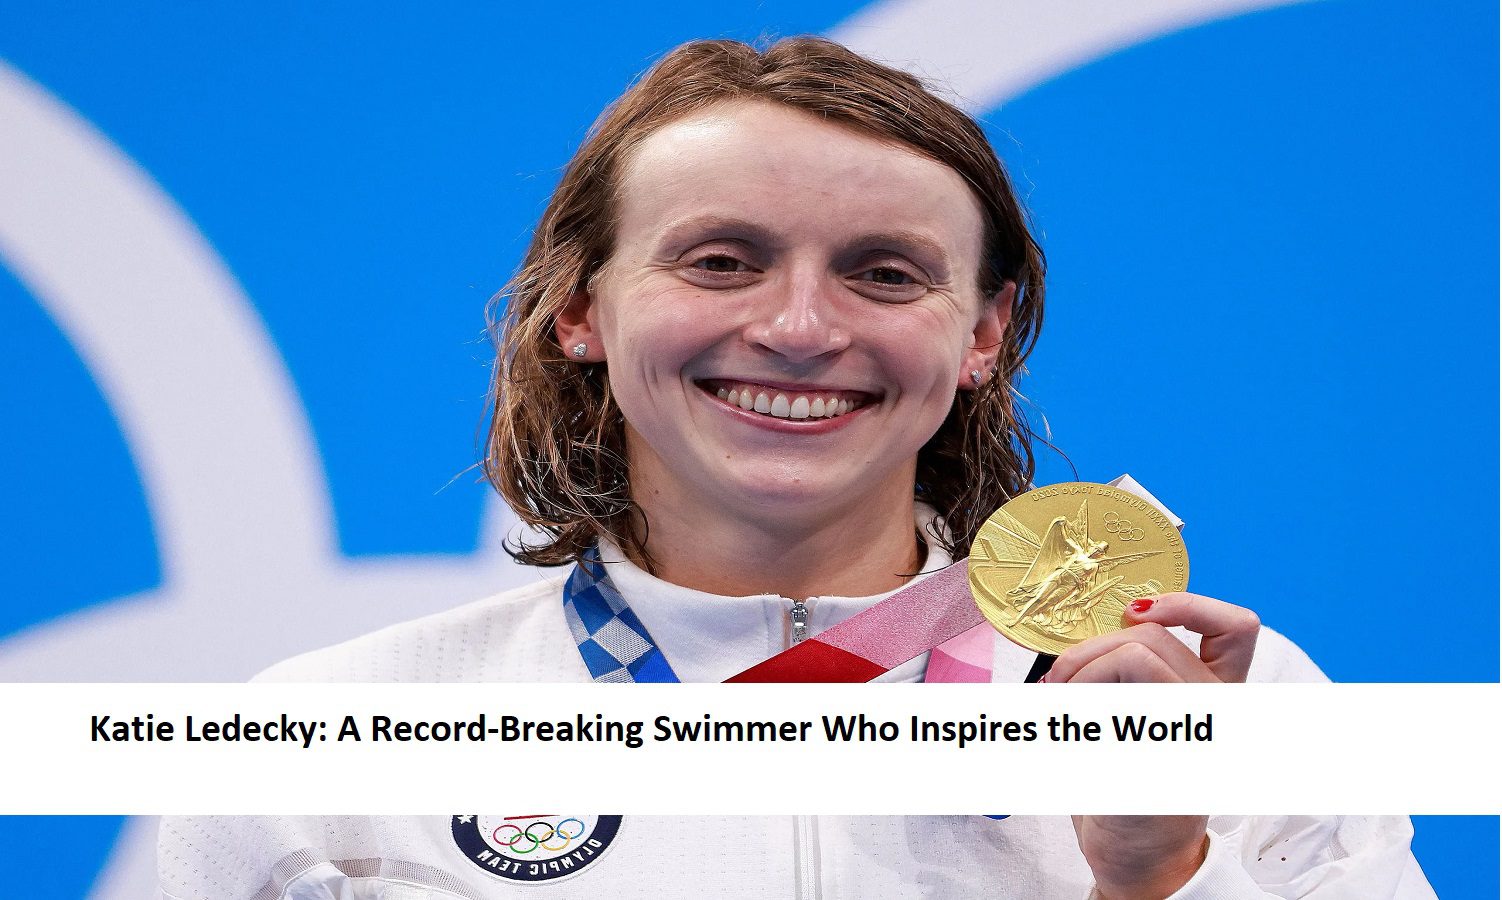 Katie Ledecky: A Record-Breaking Swimmer Who Inspires the World